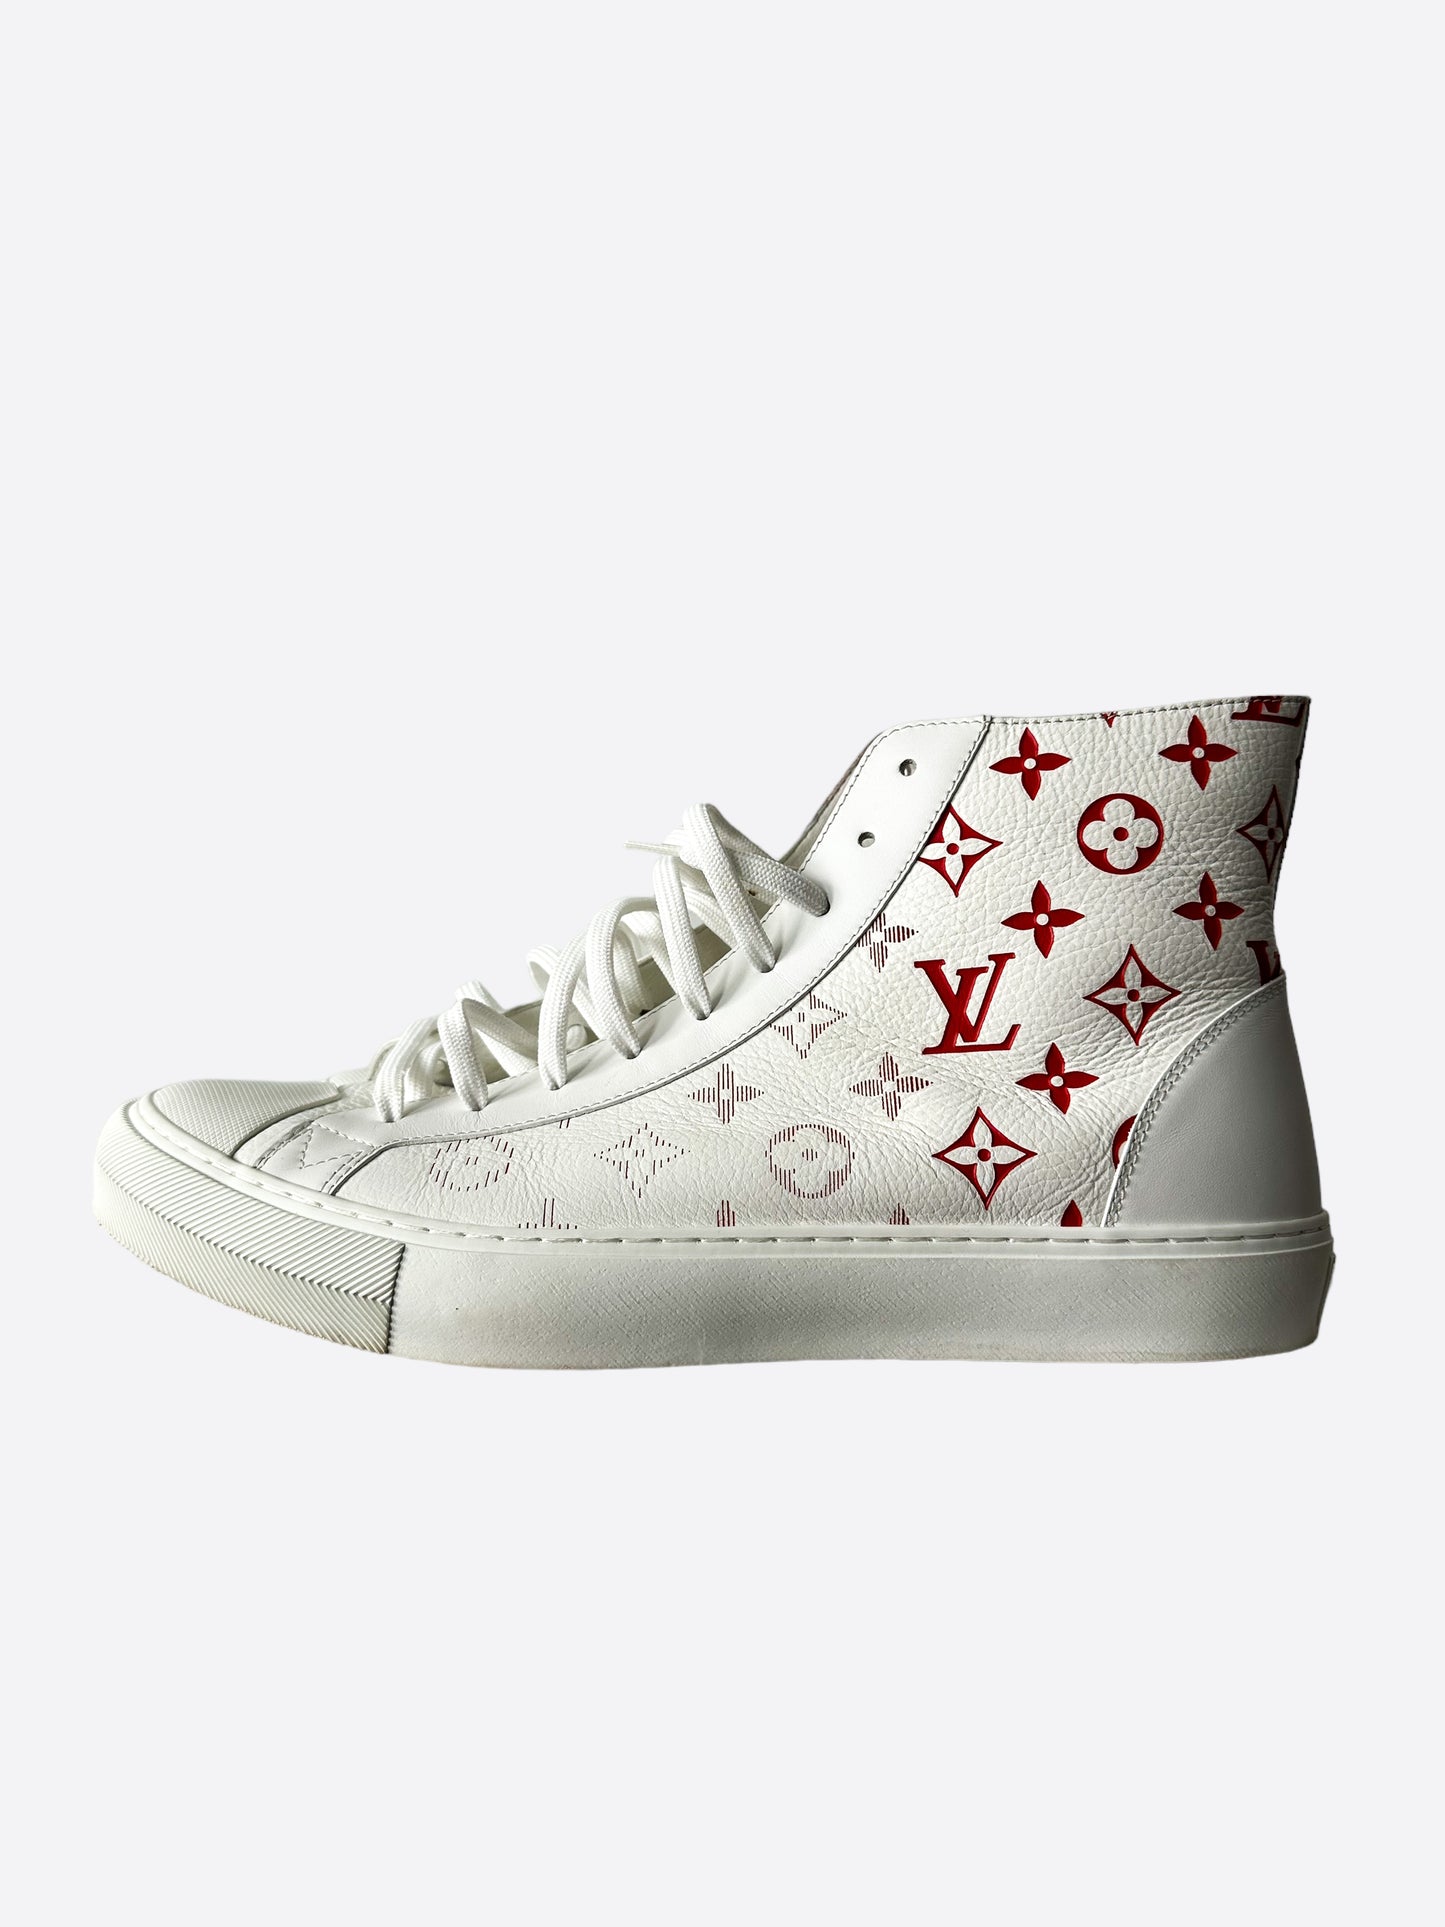 LOUIS VUITTON Monogram leather low-cut sneakers/ shoes 7 Red